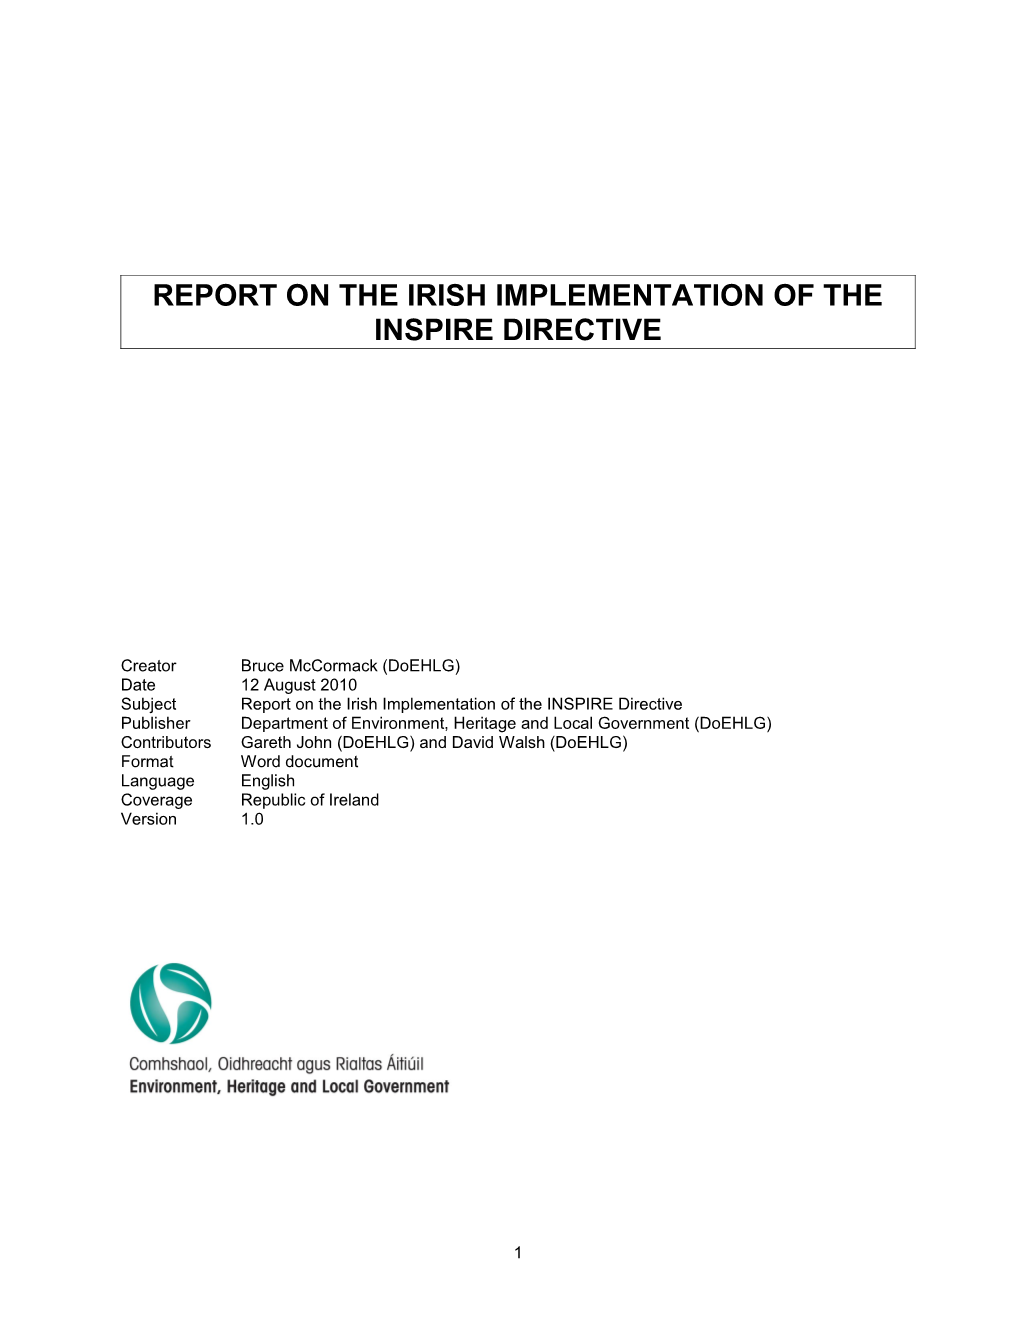 Report on the Irish Implementation of the Inspire Directive